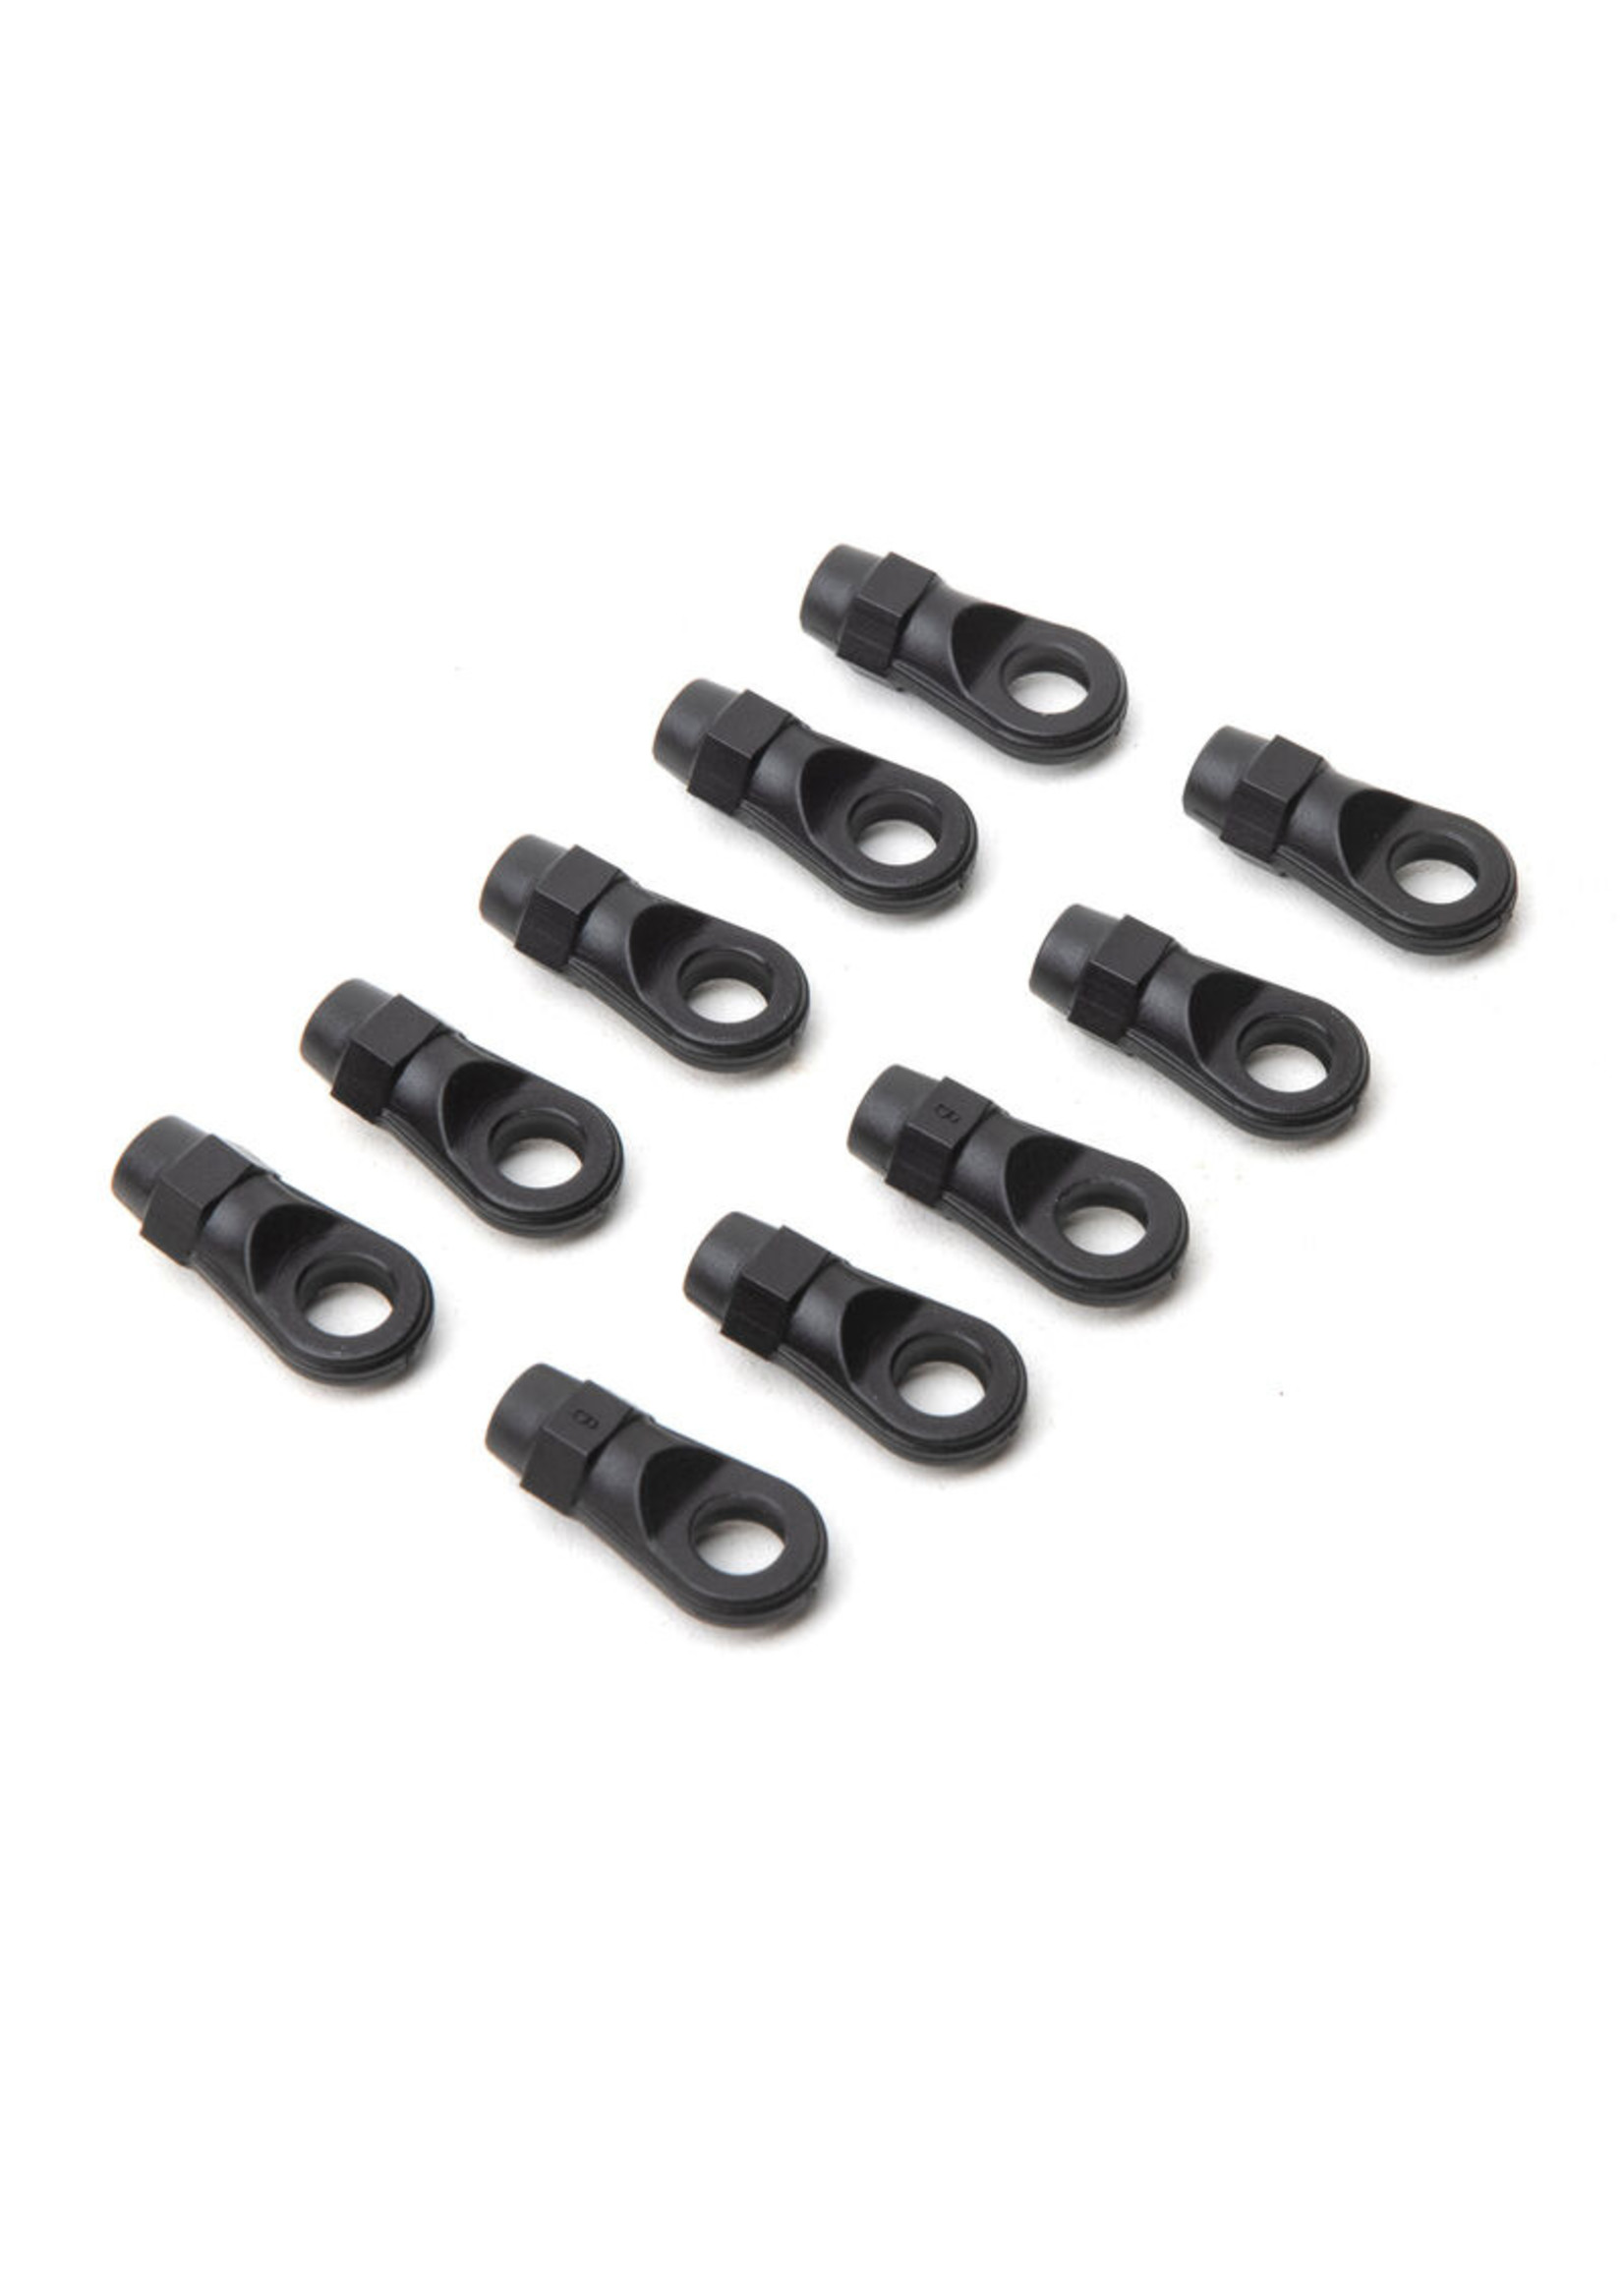 Axial AXI234025 Axial Rod Ends, Straight, M4 (10): RBX10